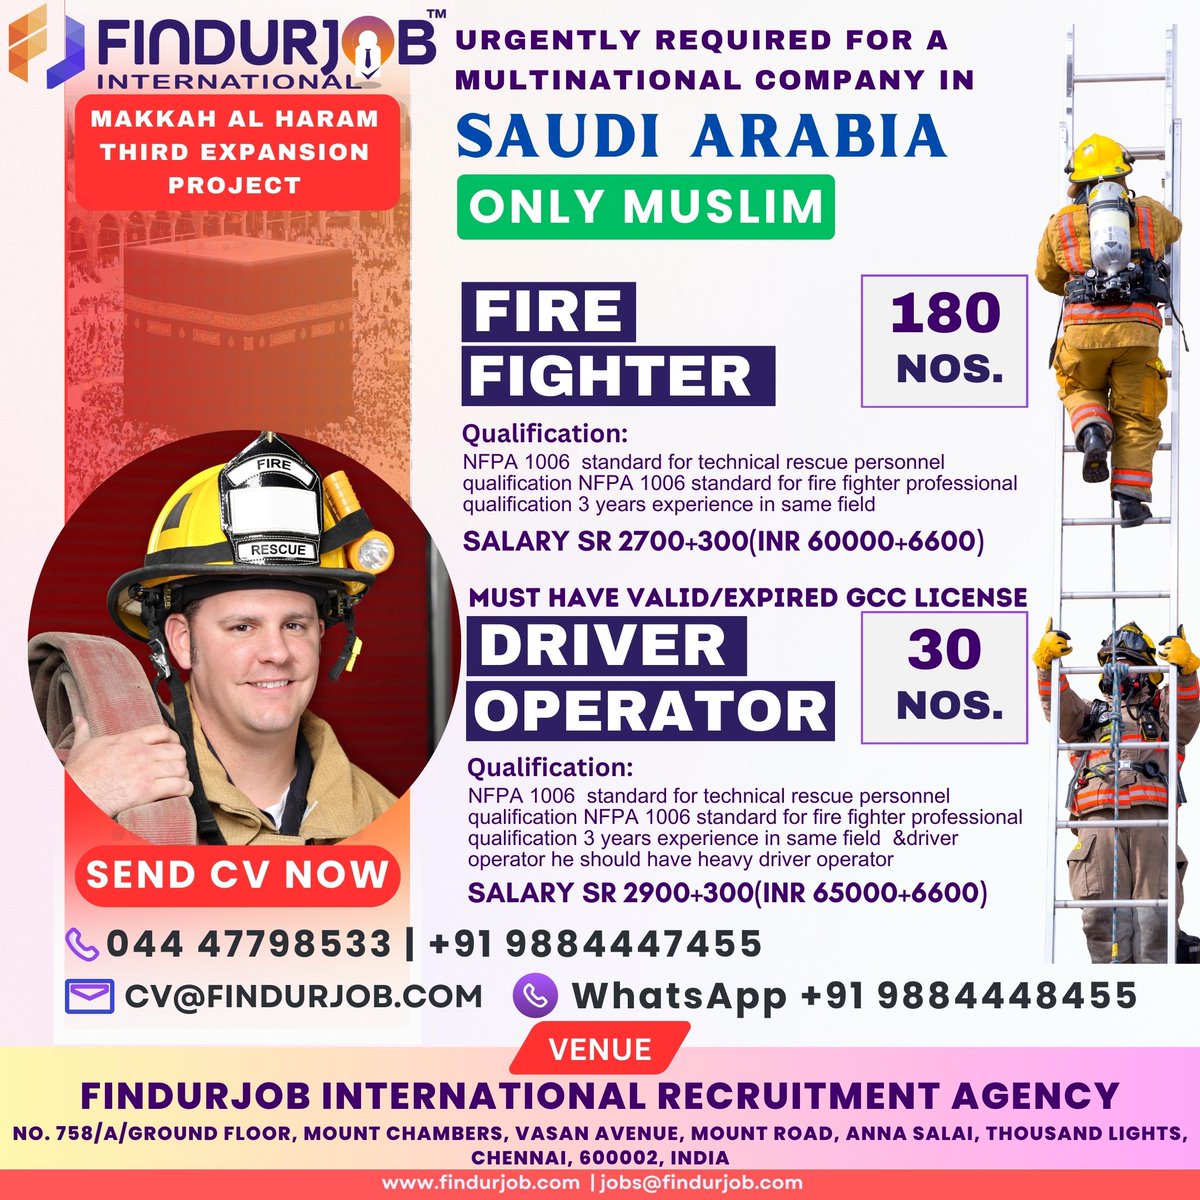 🔥Urgent Recruitment Alert: Firefighters & Driver Operators Needed in Saudi Arabia for Makkah AL Haram Third Expansion Project - Muslim Applicants Only! 🔥

Send your CV now to cv@findurjob.com,WhatsApp us at +91 9884448455

#FirefighterJobs #DriverOperator #ApplyNow #SaudiJobs